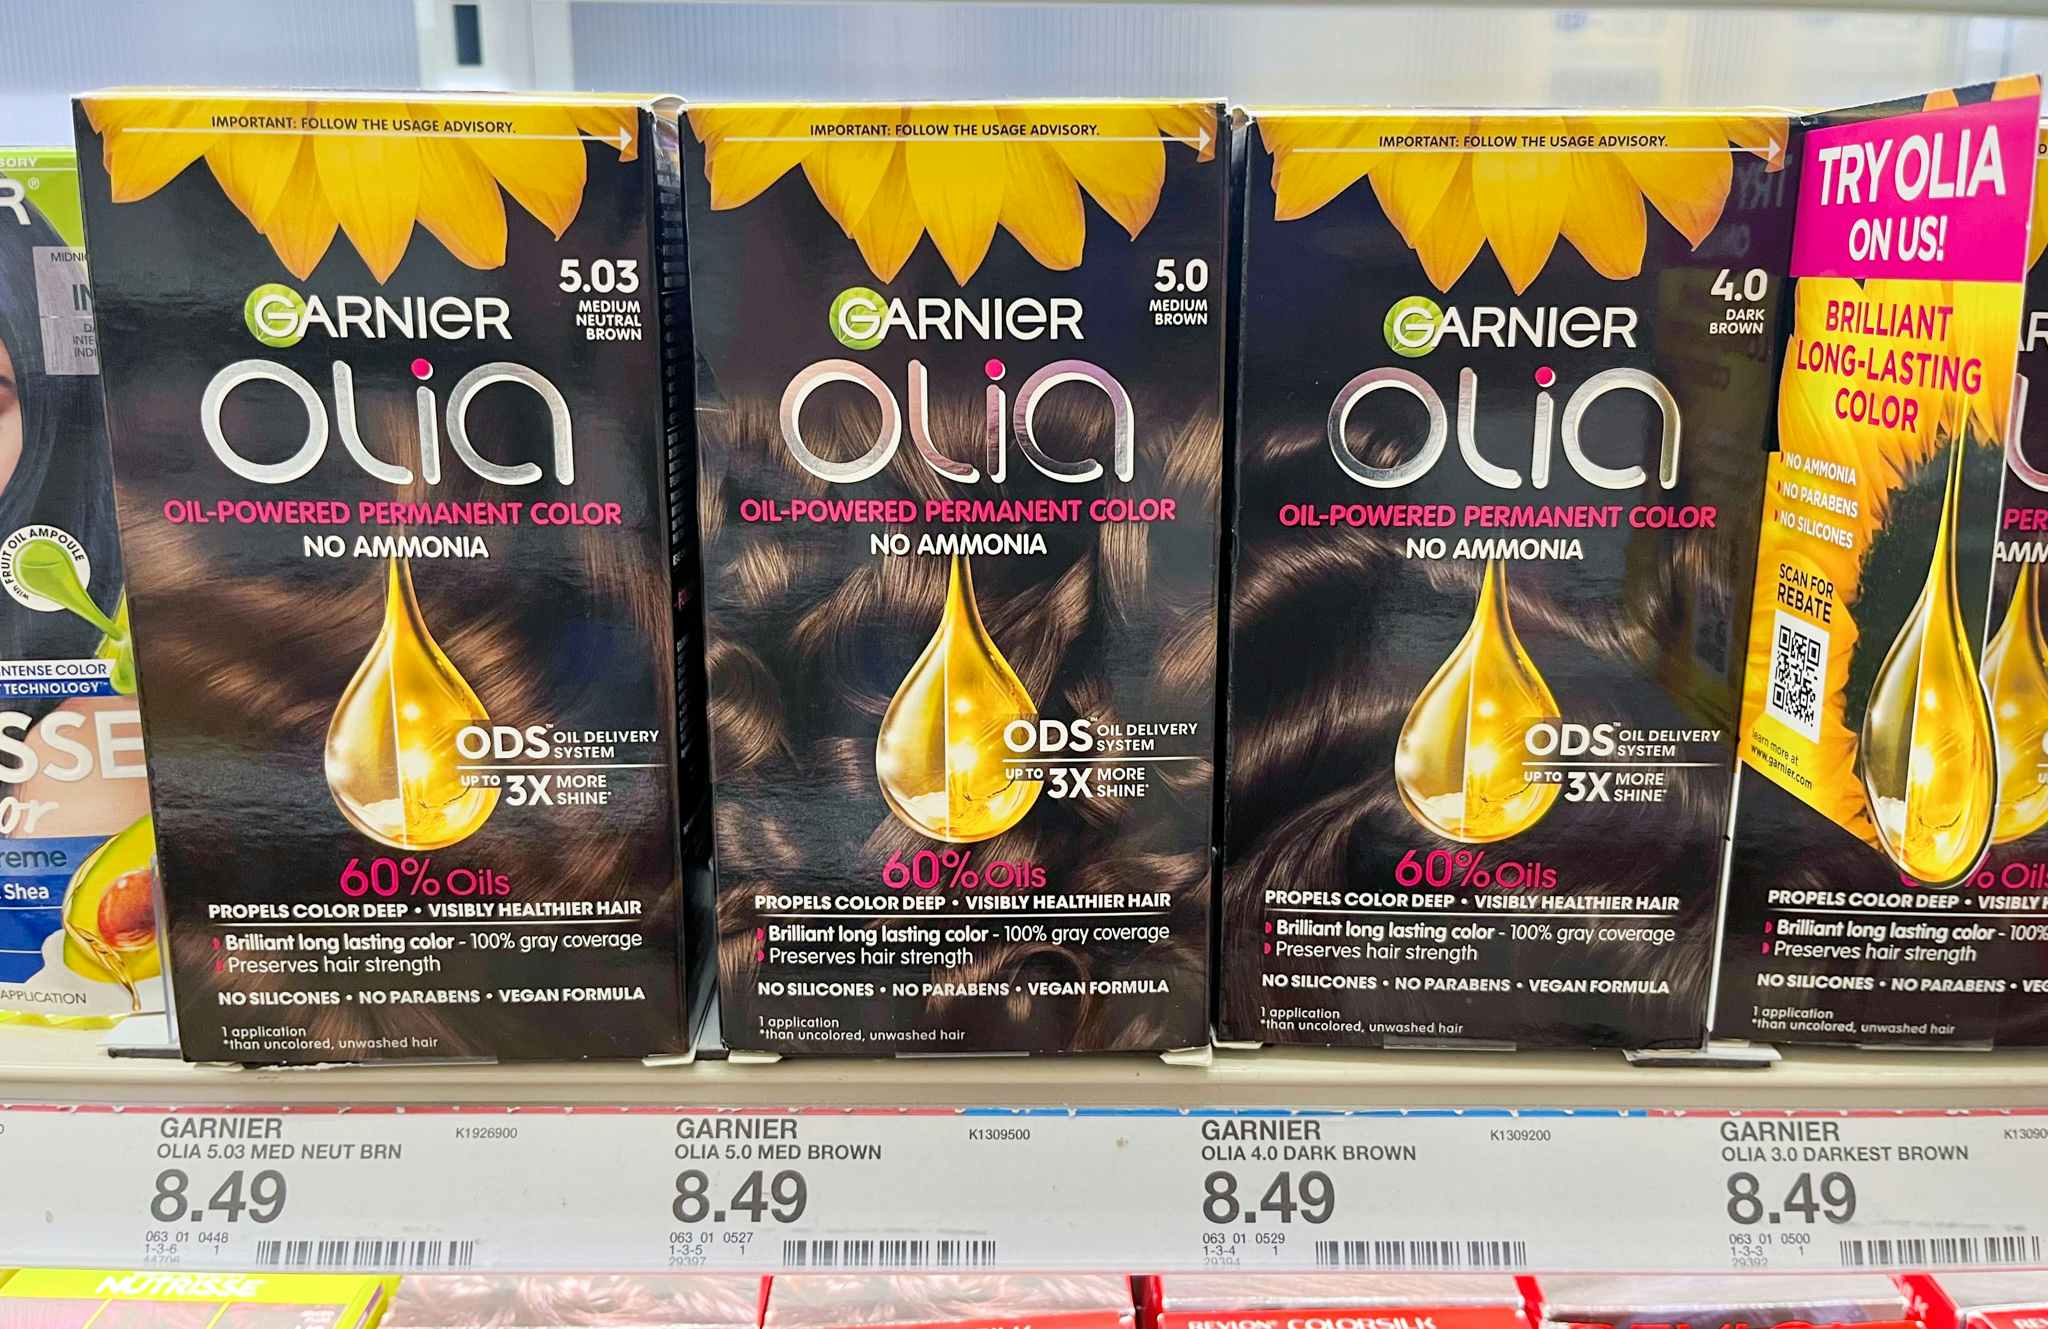 Garnier Olia Hair Color products on shelf at Target. Sticker on shelf indicates that the price is $8.49.